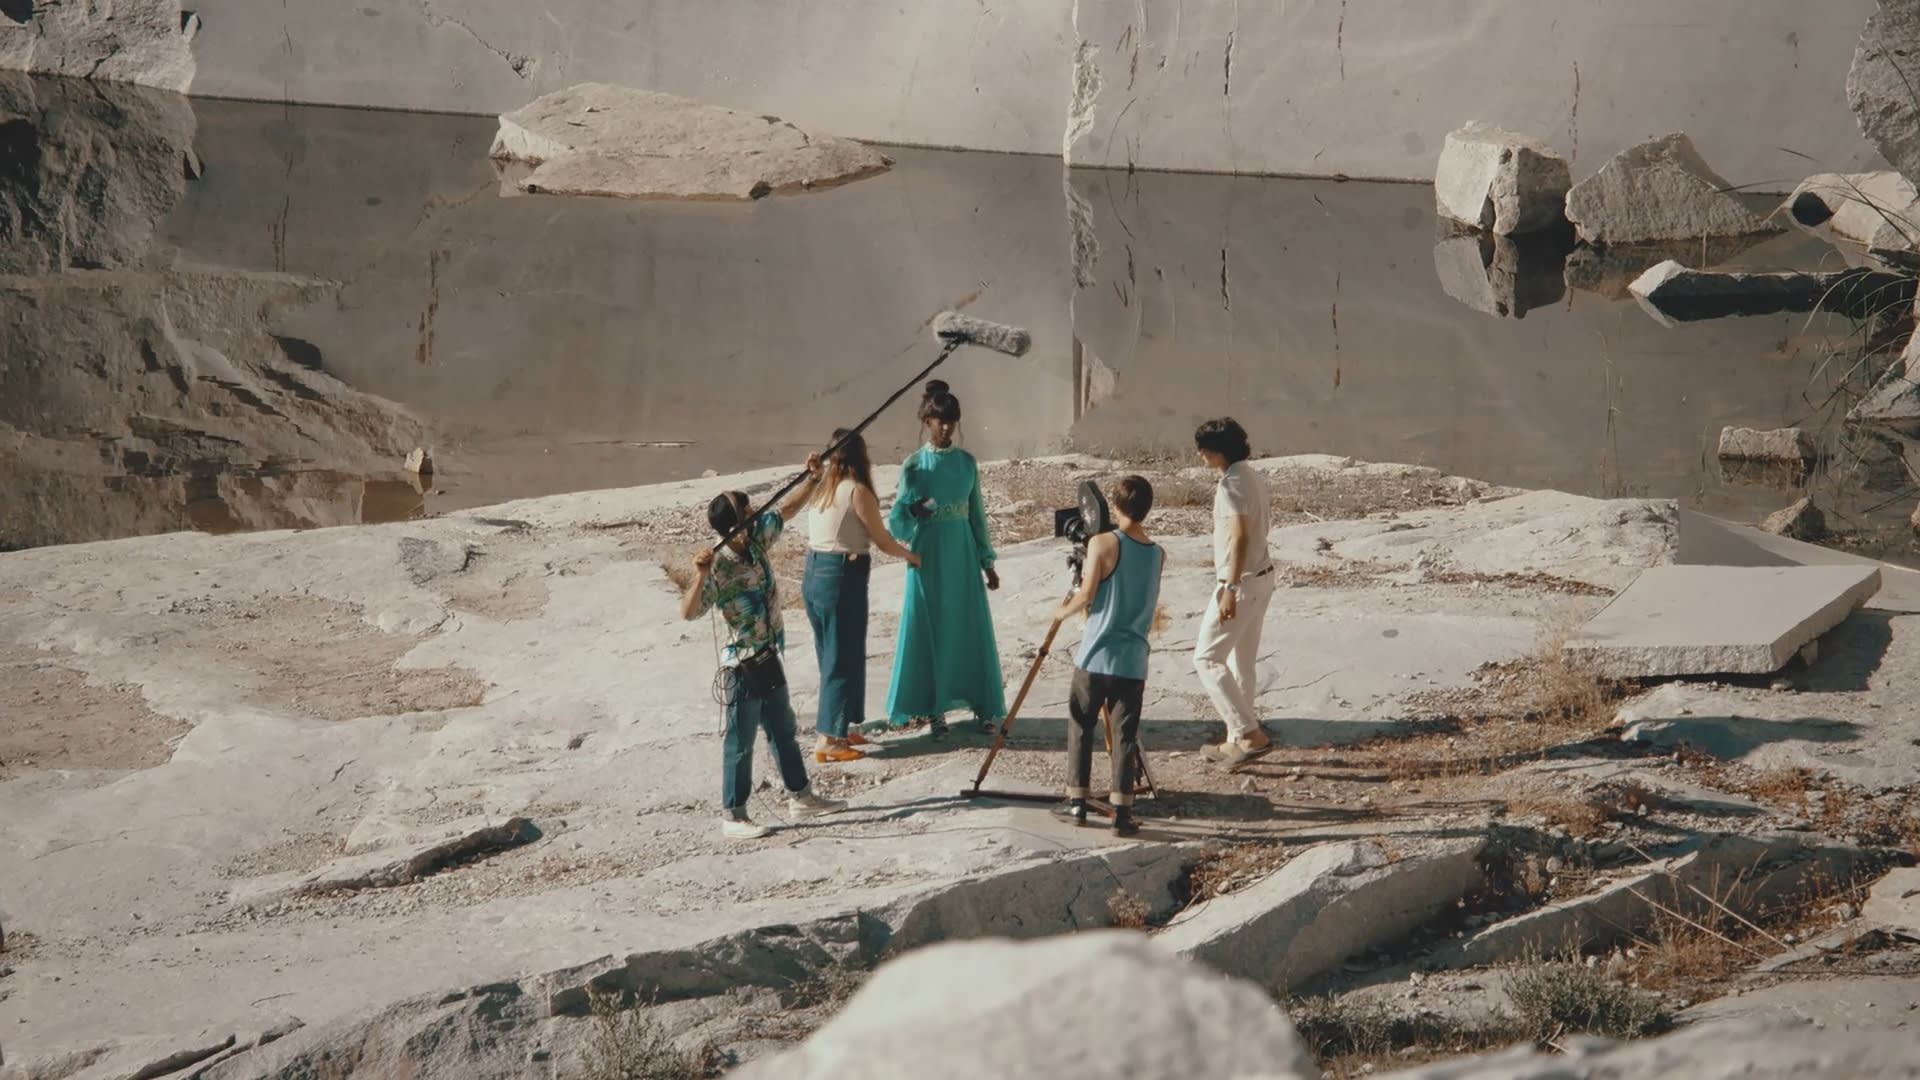 Actress with a long aqua dress, surrounded by four people assisting in an outdoor film shoot, based in a Spanish stone quarry